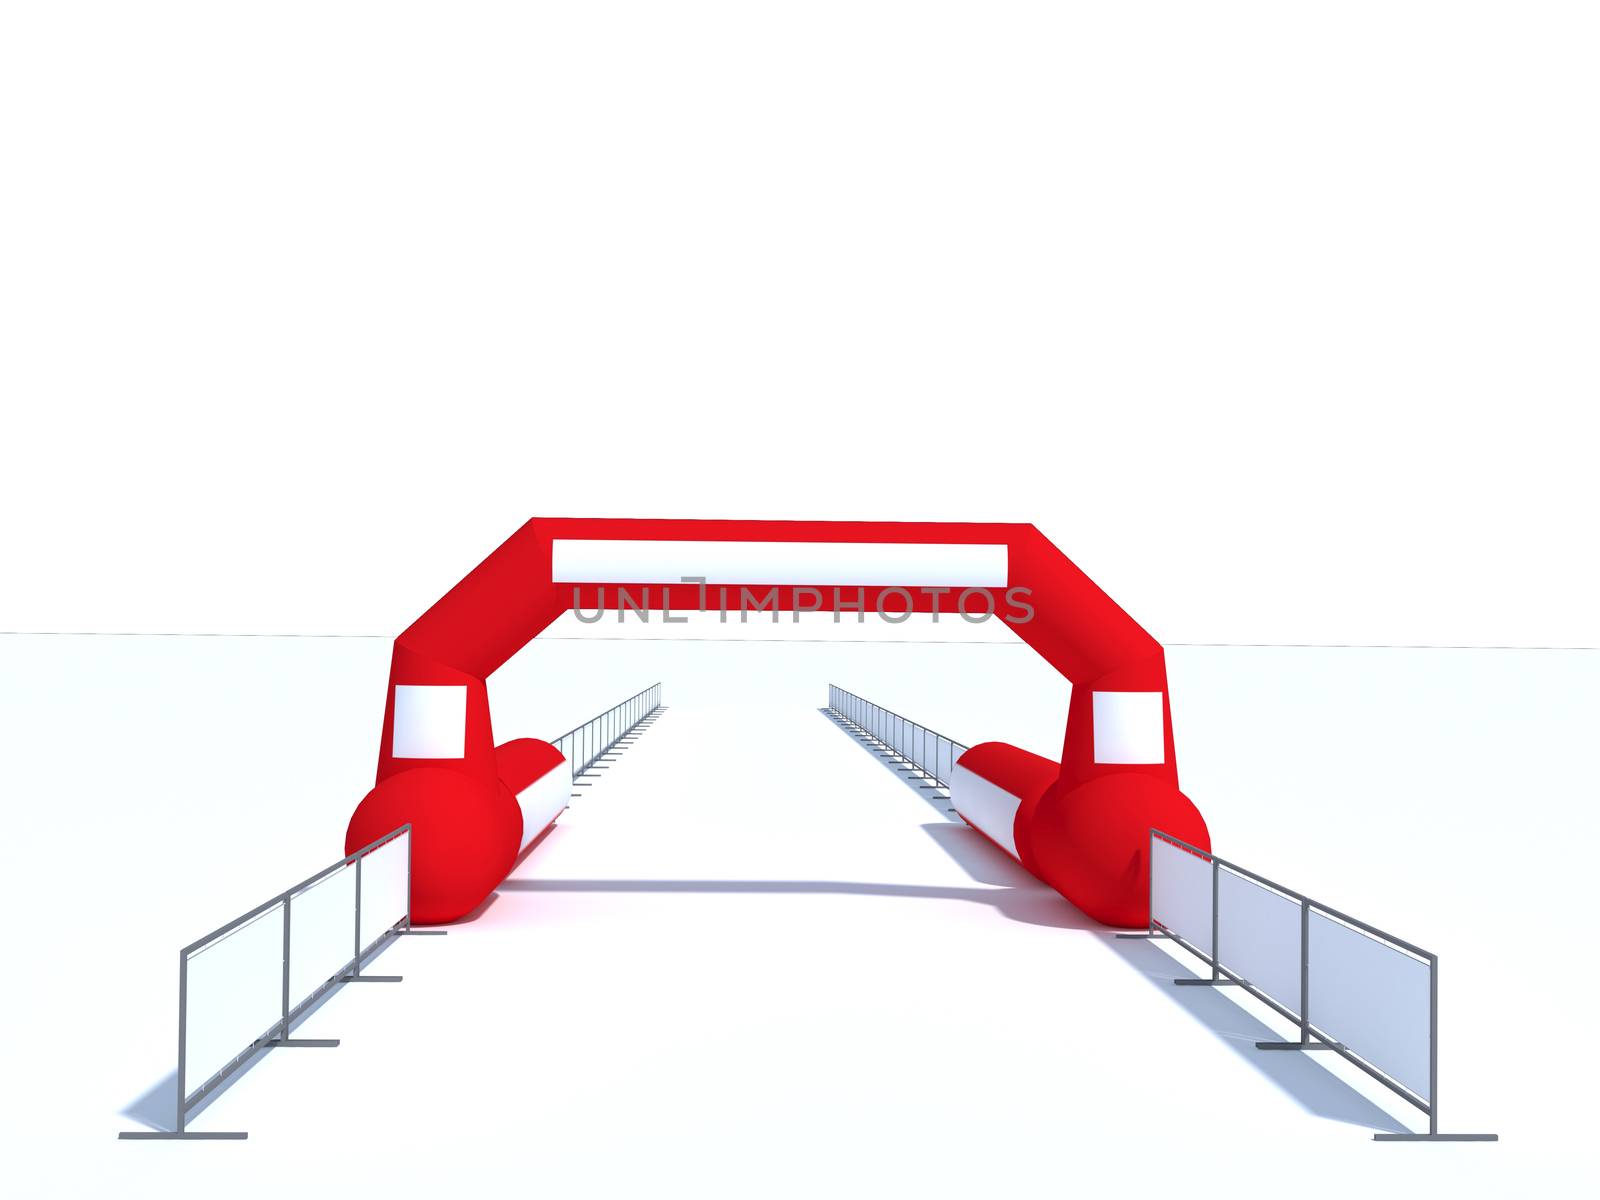 Inflatable start and finish line arch illustrations - Inflatable archways suitable for outdoor sport events 3d render by Vassiliy